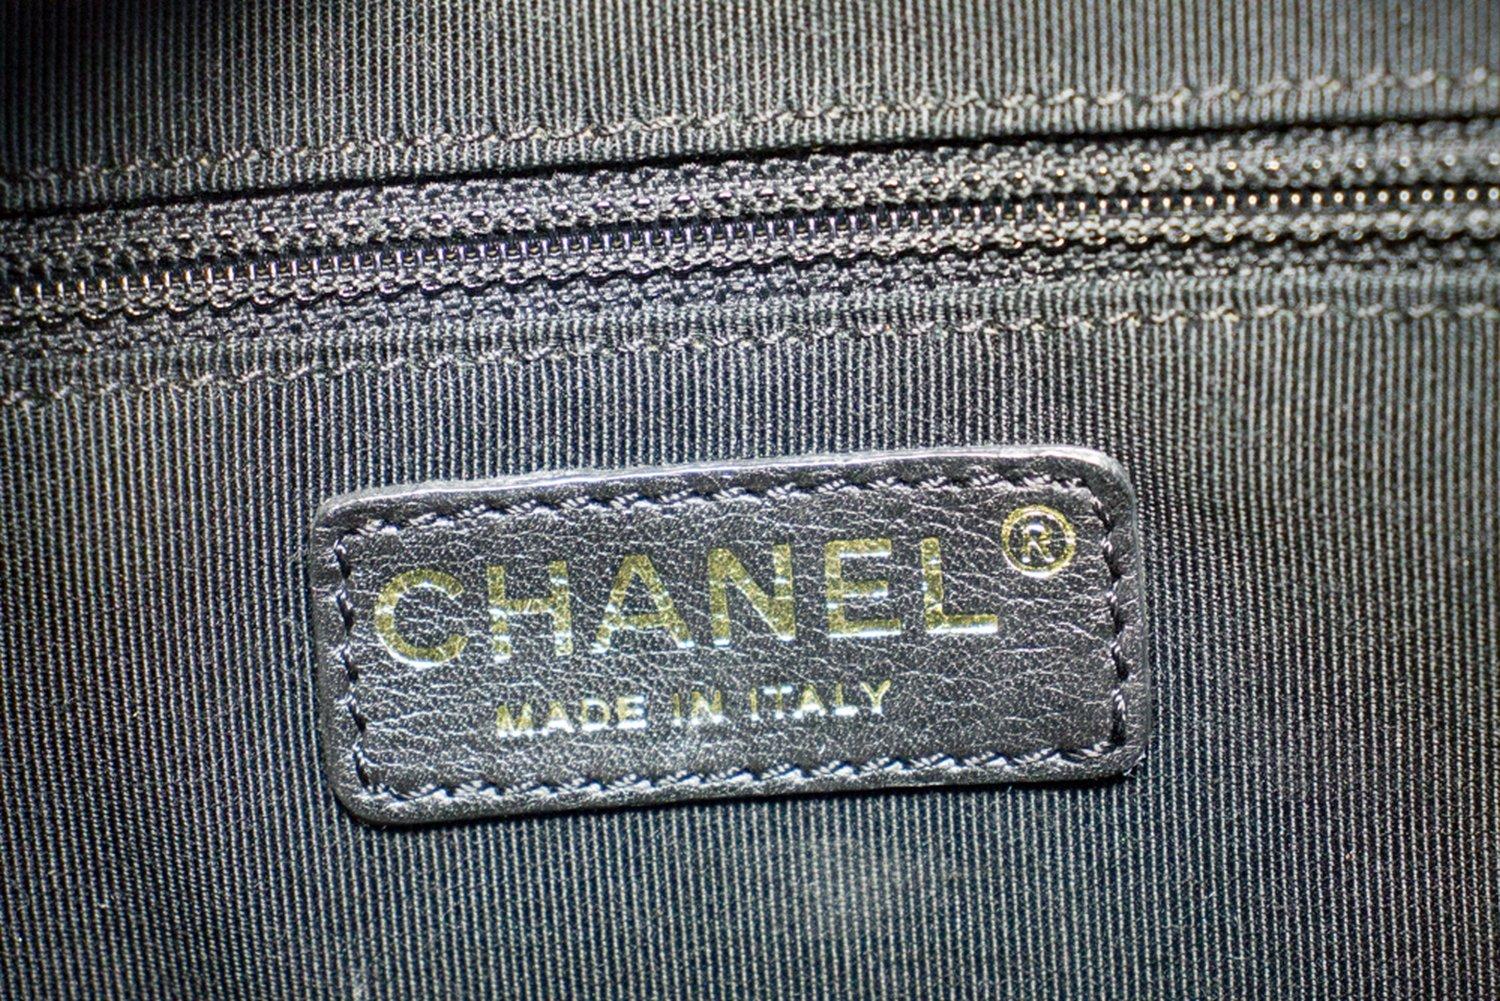 CHANEL Caviar Chain Shoulder Shopping Tote Bag Black Quilted Purse 10